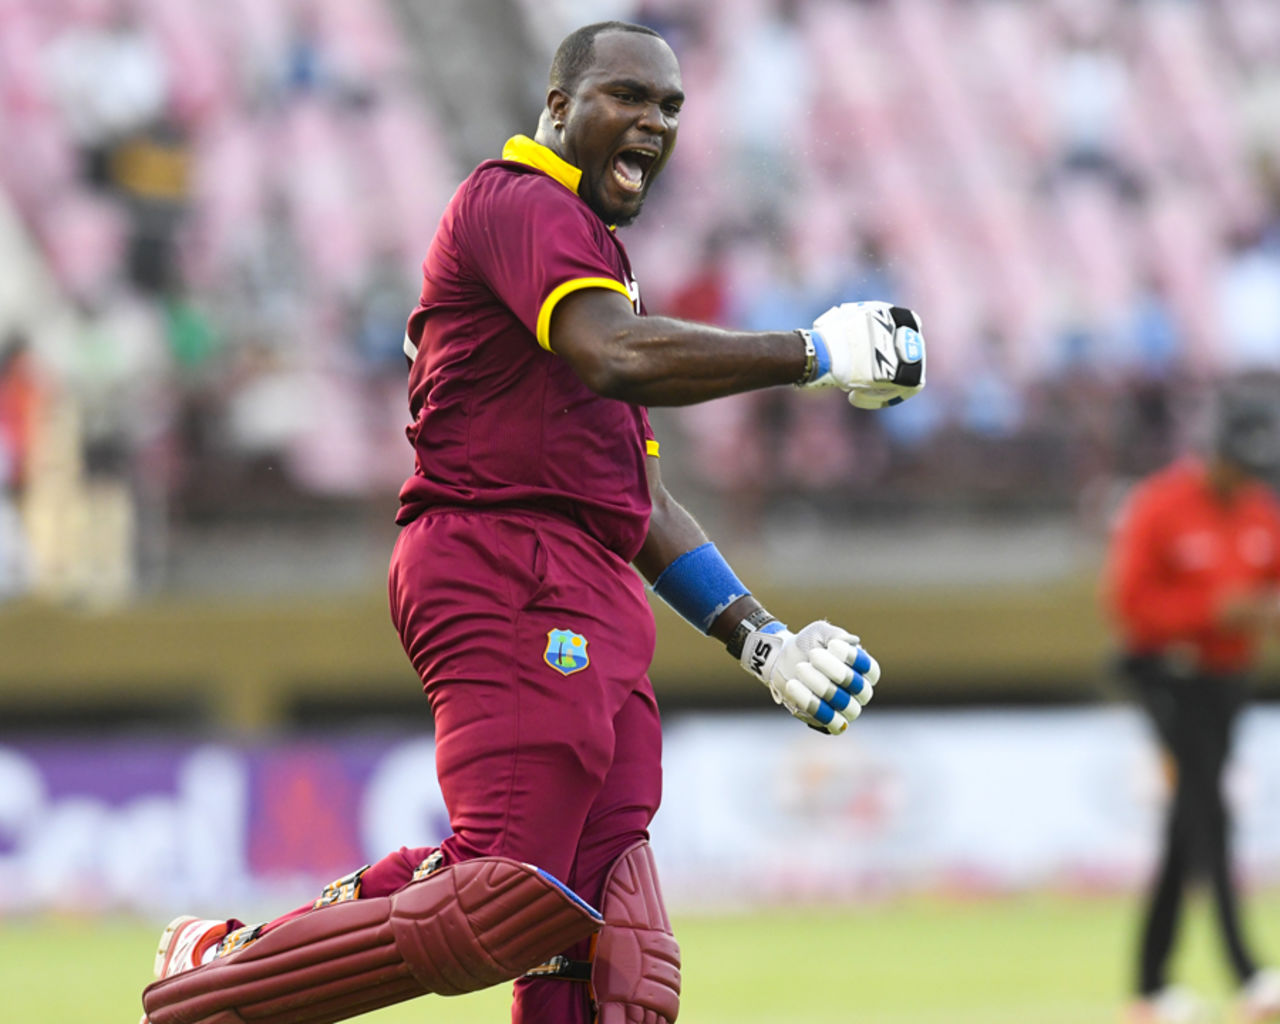 Ashley Nurse pumps his fist after sealing the game for West Indies, West Indies v Pakistan, 1st ODI, Guyana, April 7, 2017